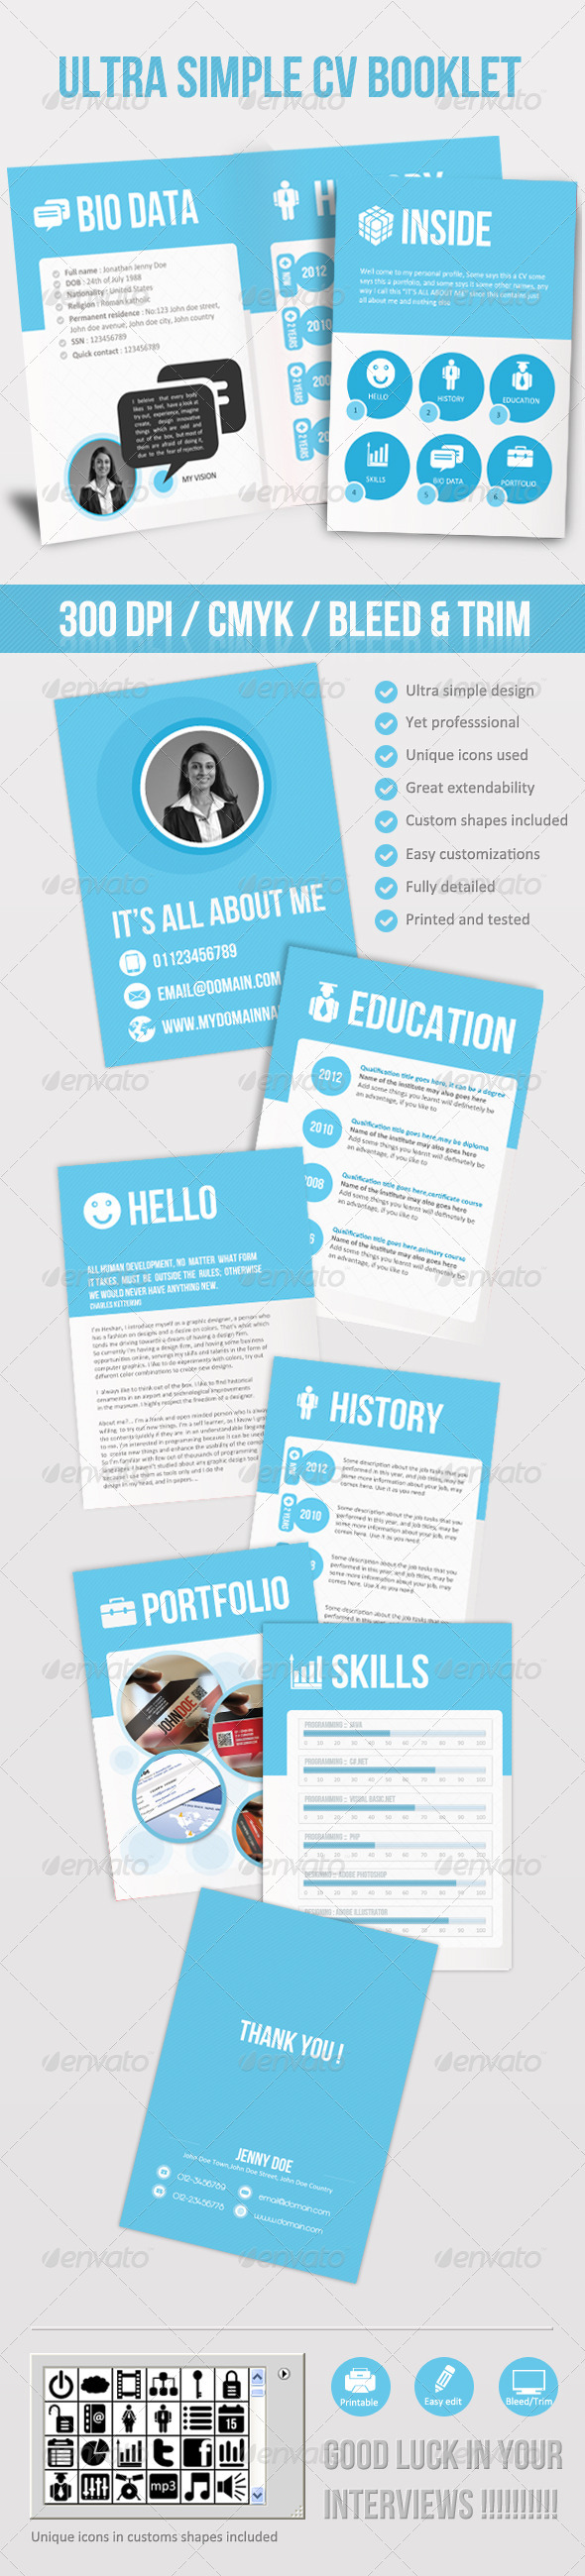 ultra simple yet professional cv booklet by anchor point heshan